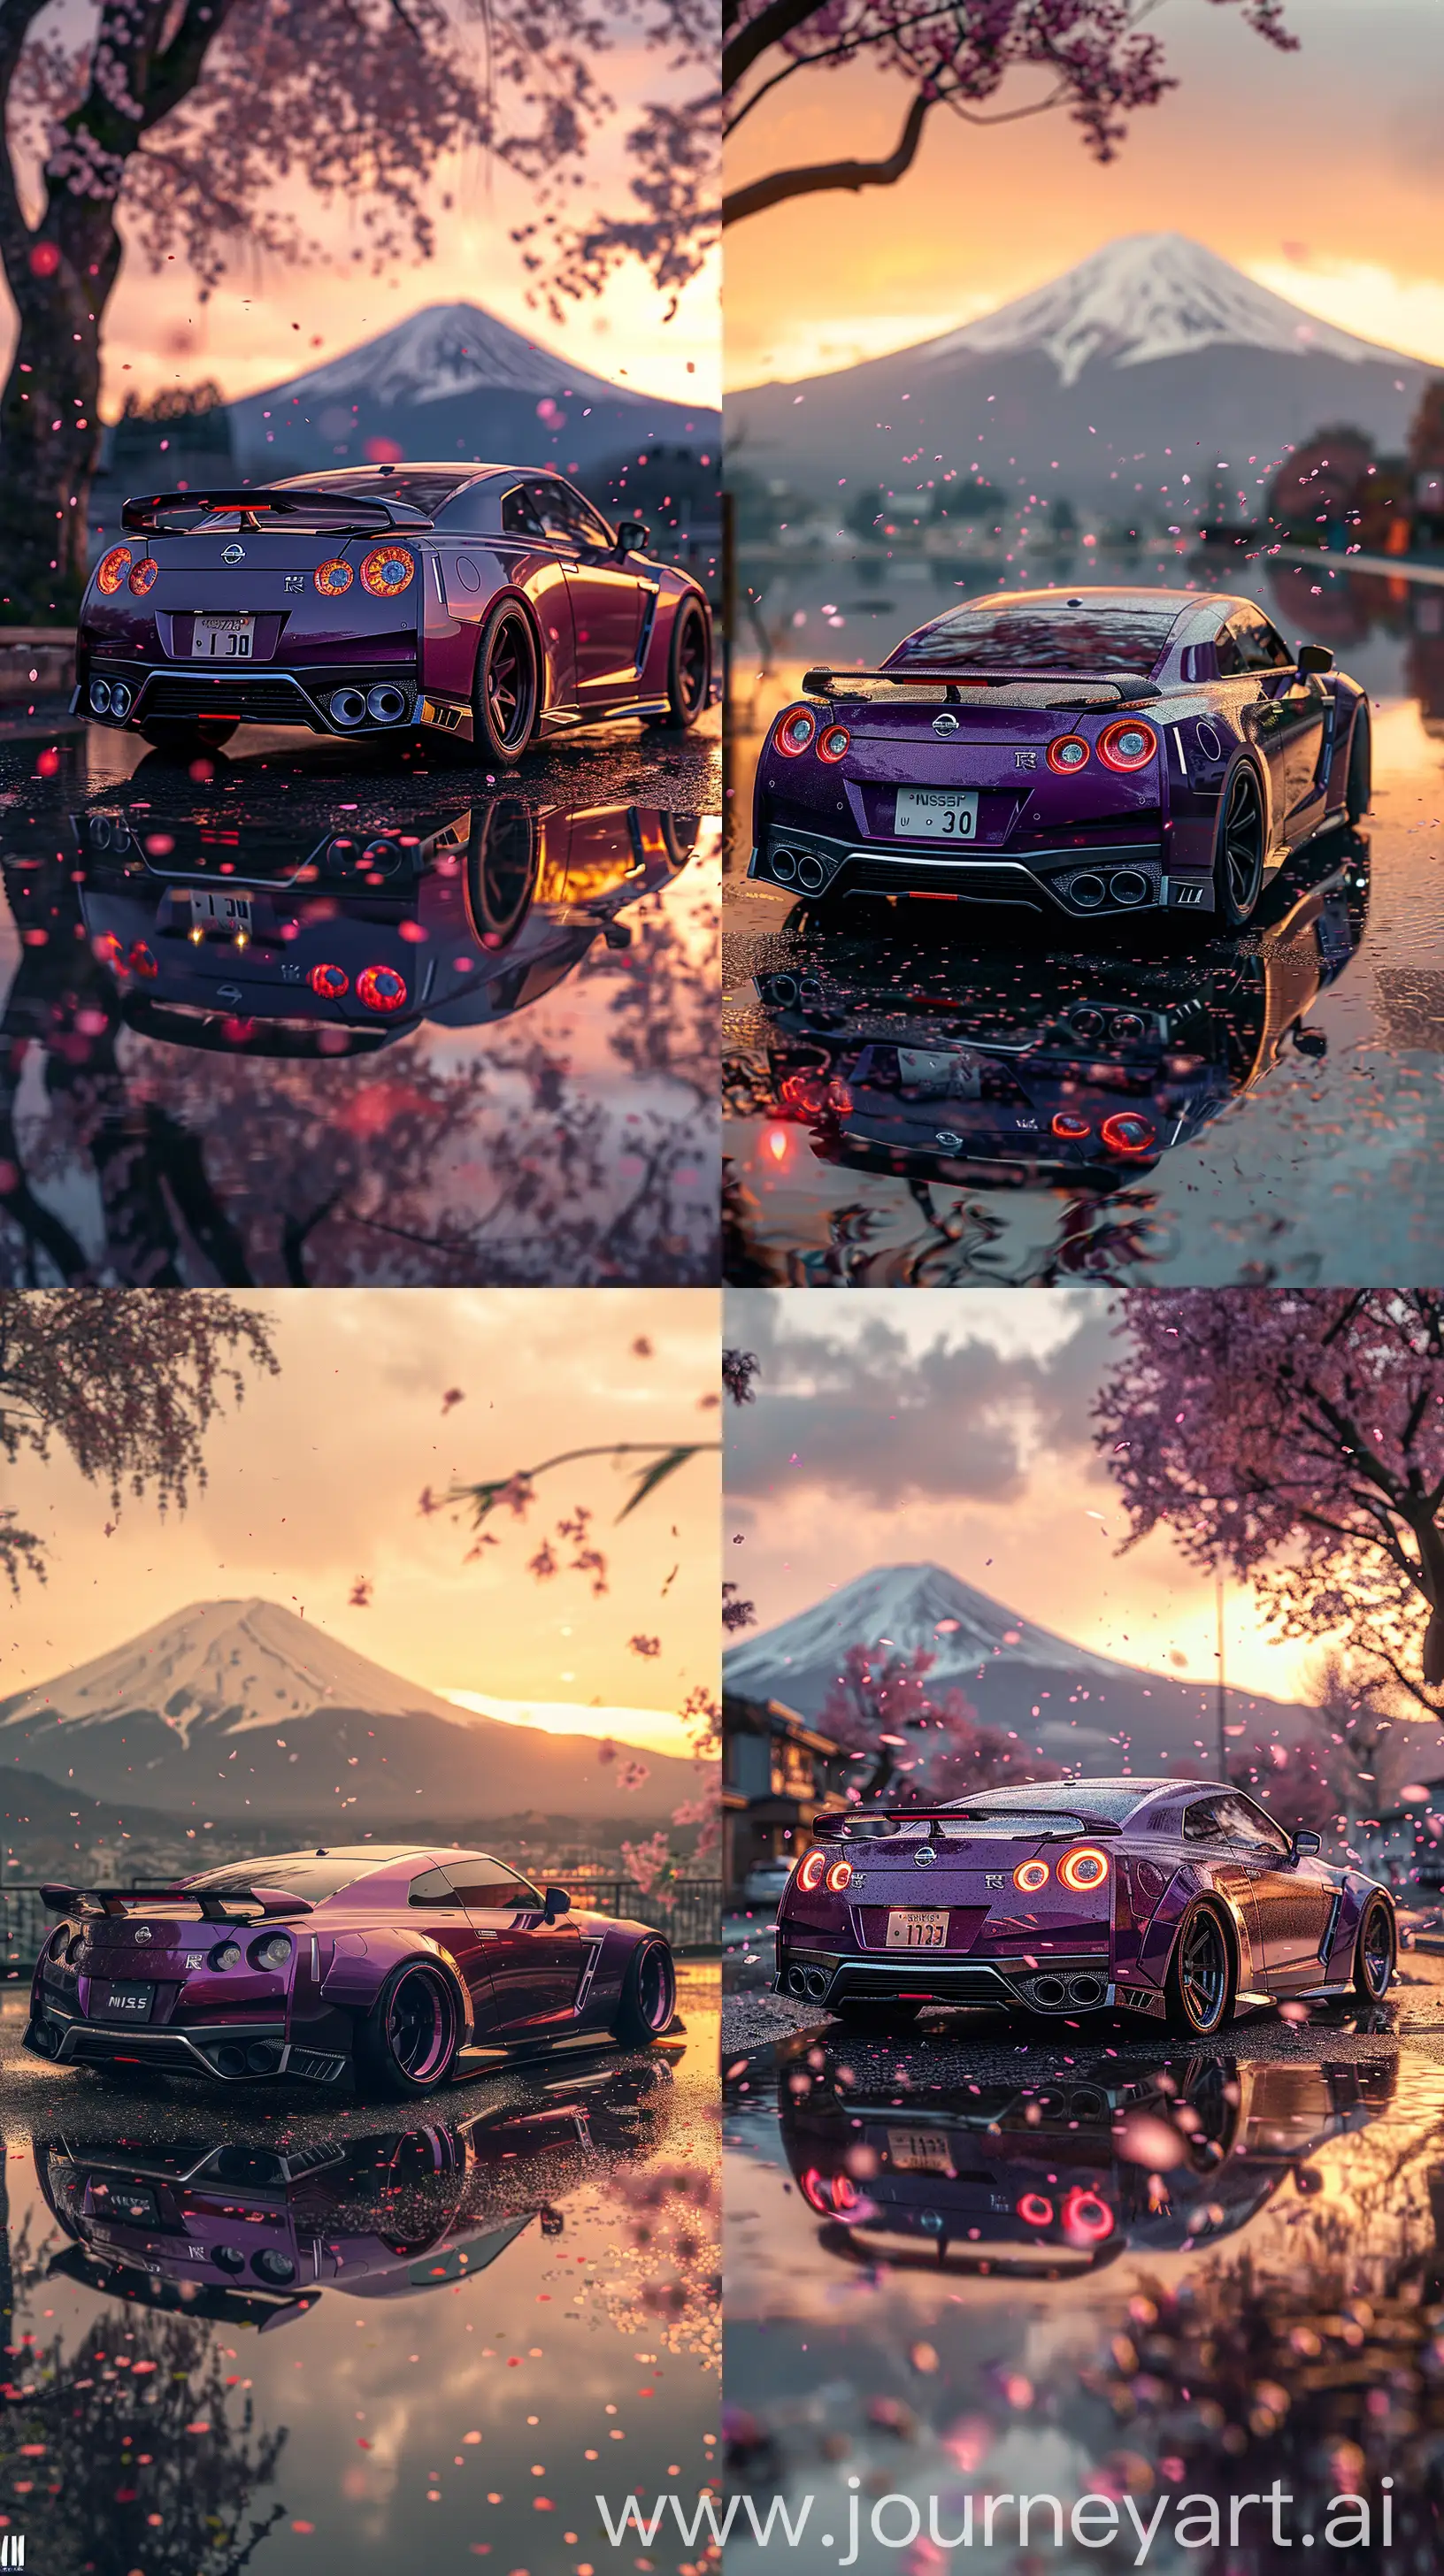 !mj2 https://i.postimg.cc/FzF8q1Zn/Screenshot-2024-0403-211117.jpg Sleek purple Nissan GT-R with reflective surfaces, parked foreground, dramatic view of Mount Fuji at sunset in the background, cherry blossoms gently falling, distinct shadows, hyperrealistic style, vibrant colors --ar 9:16 --s 700 --v 6